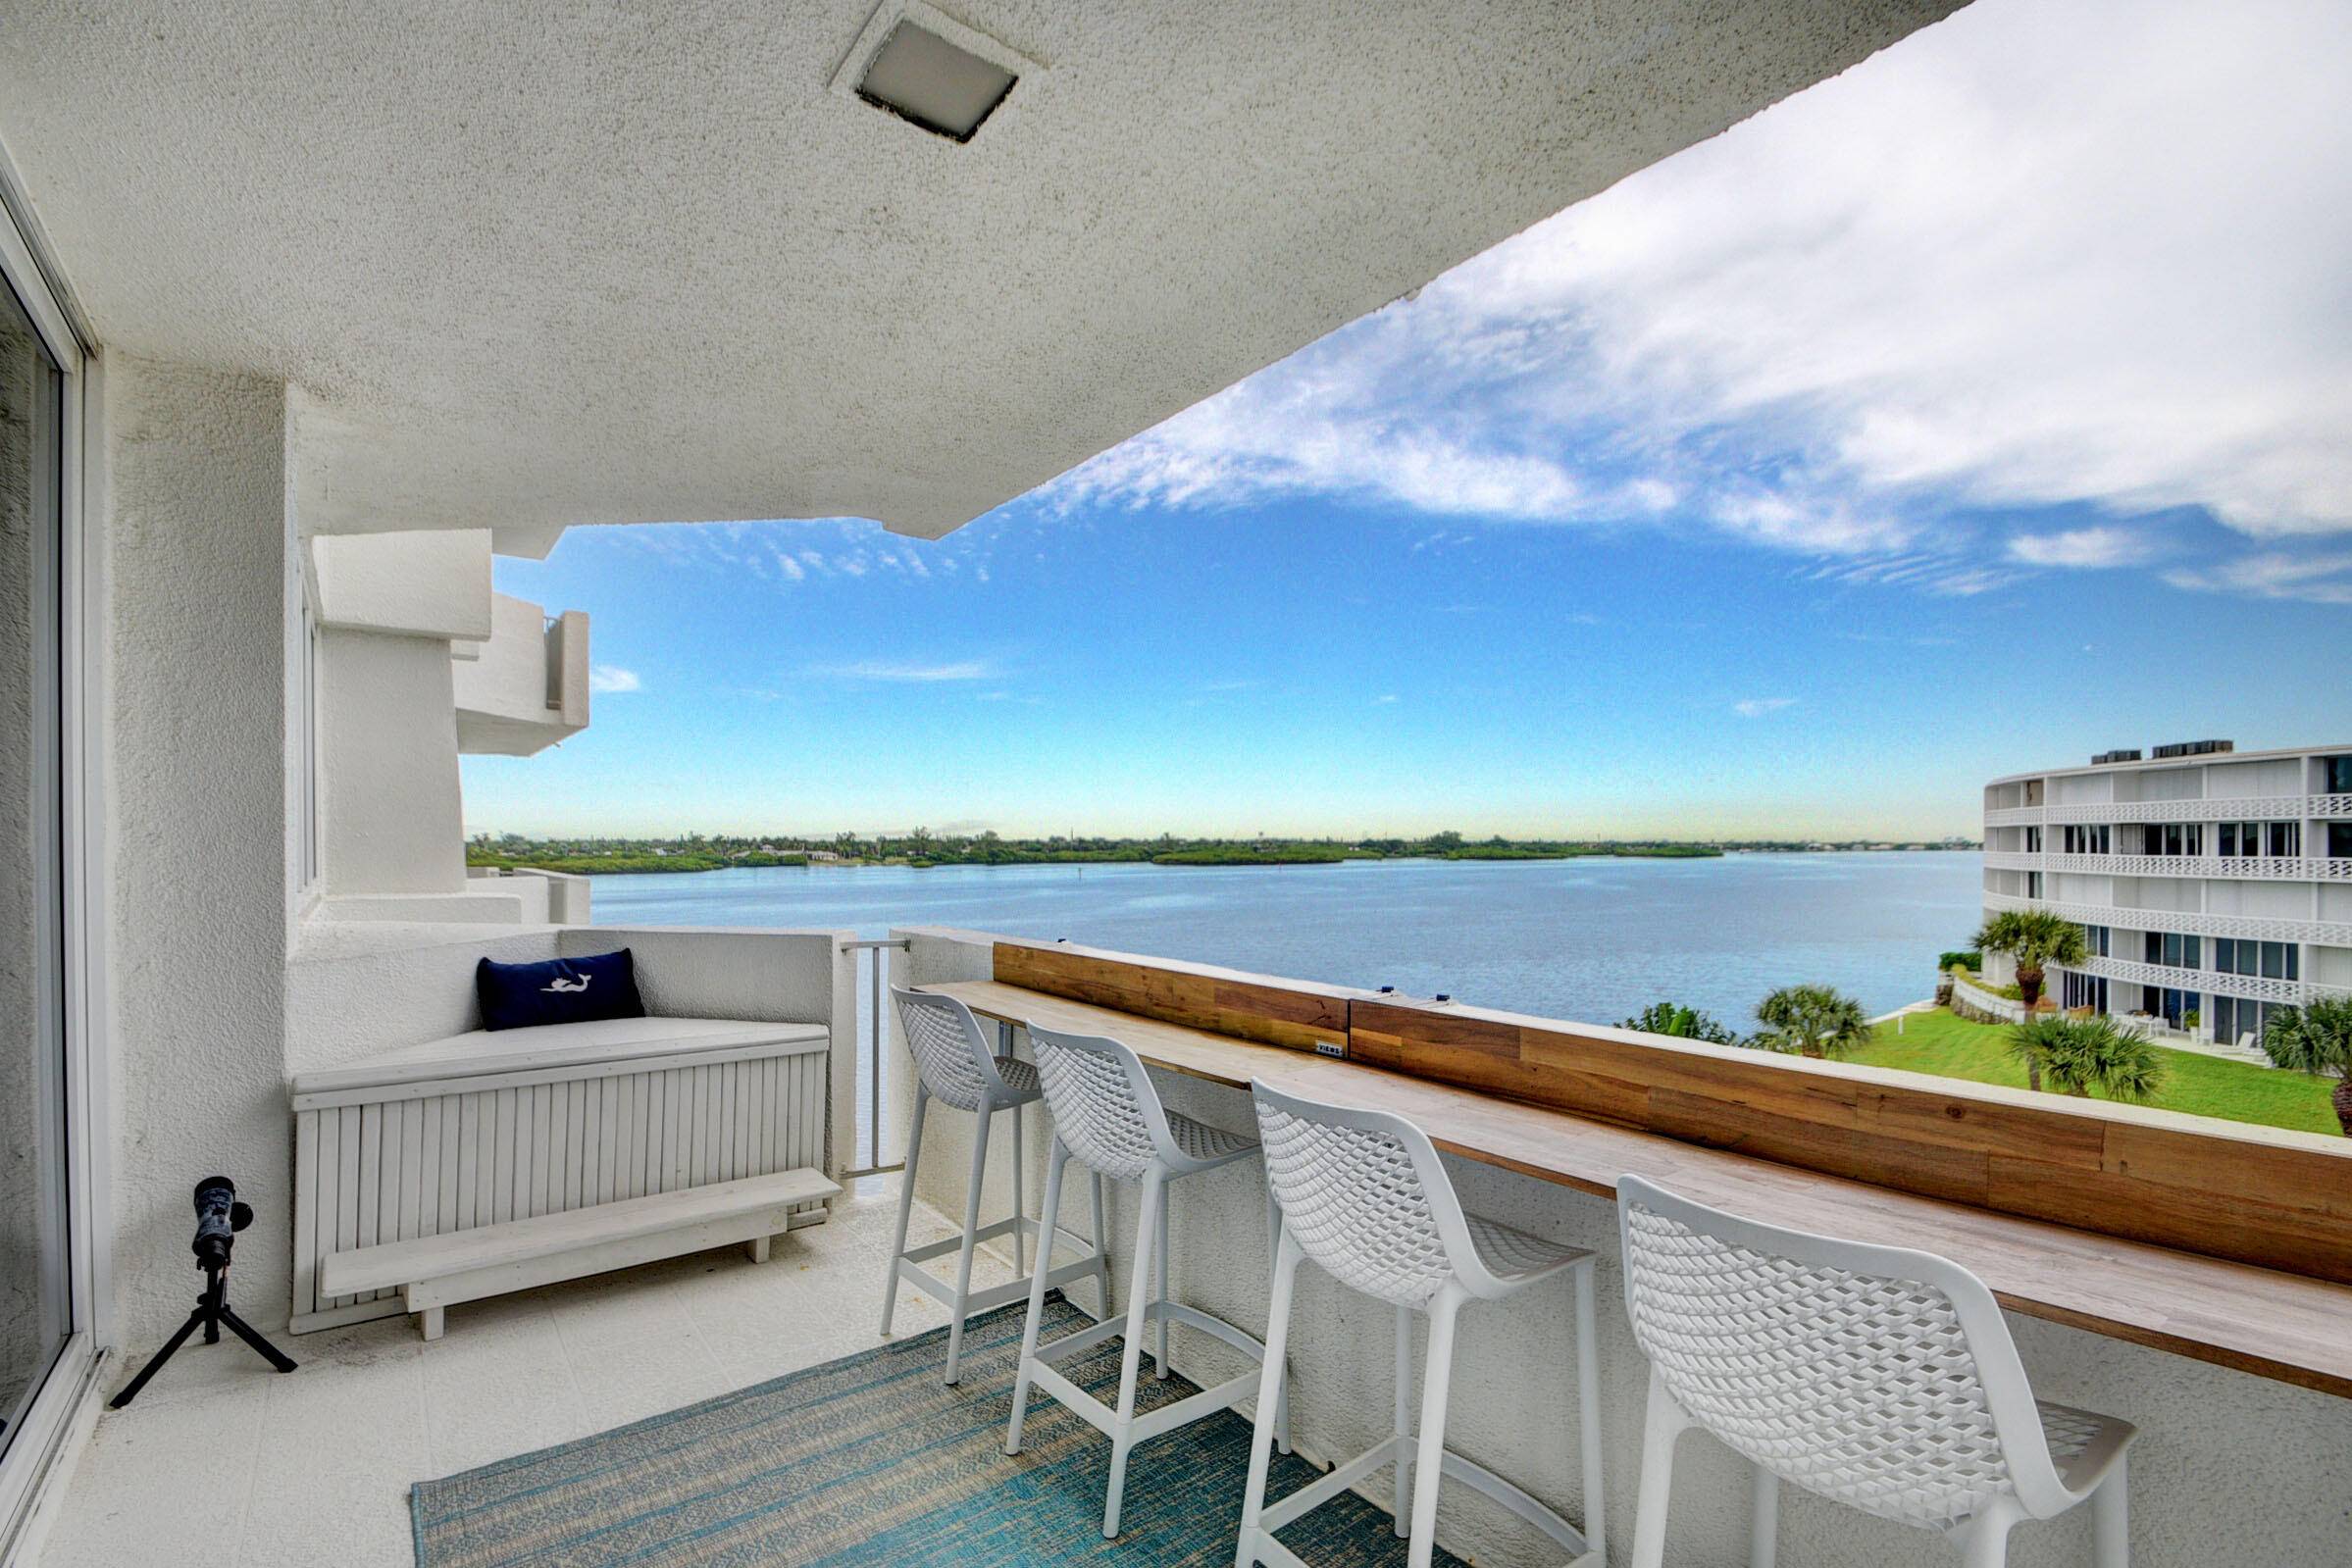 Beautifully remodeled intracoastal waterfront oasis with private beach access across the street.